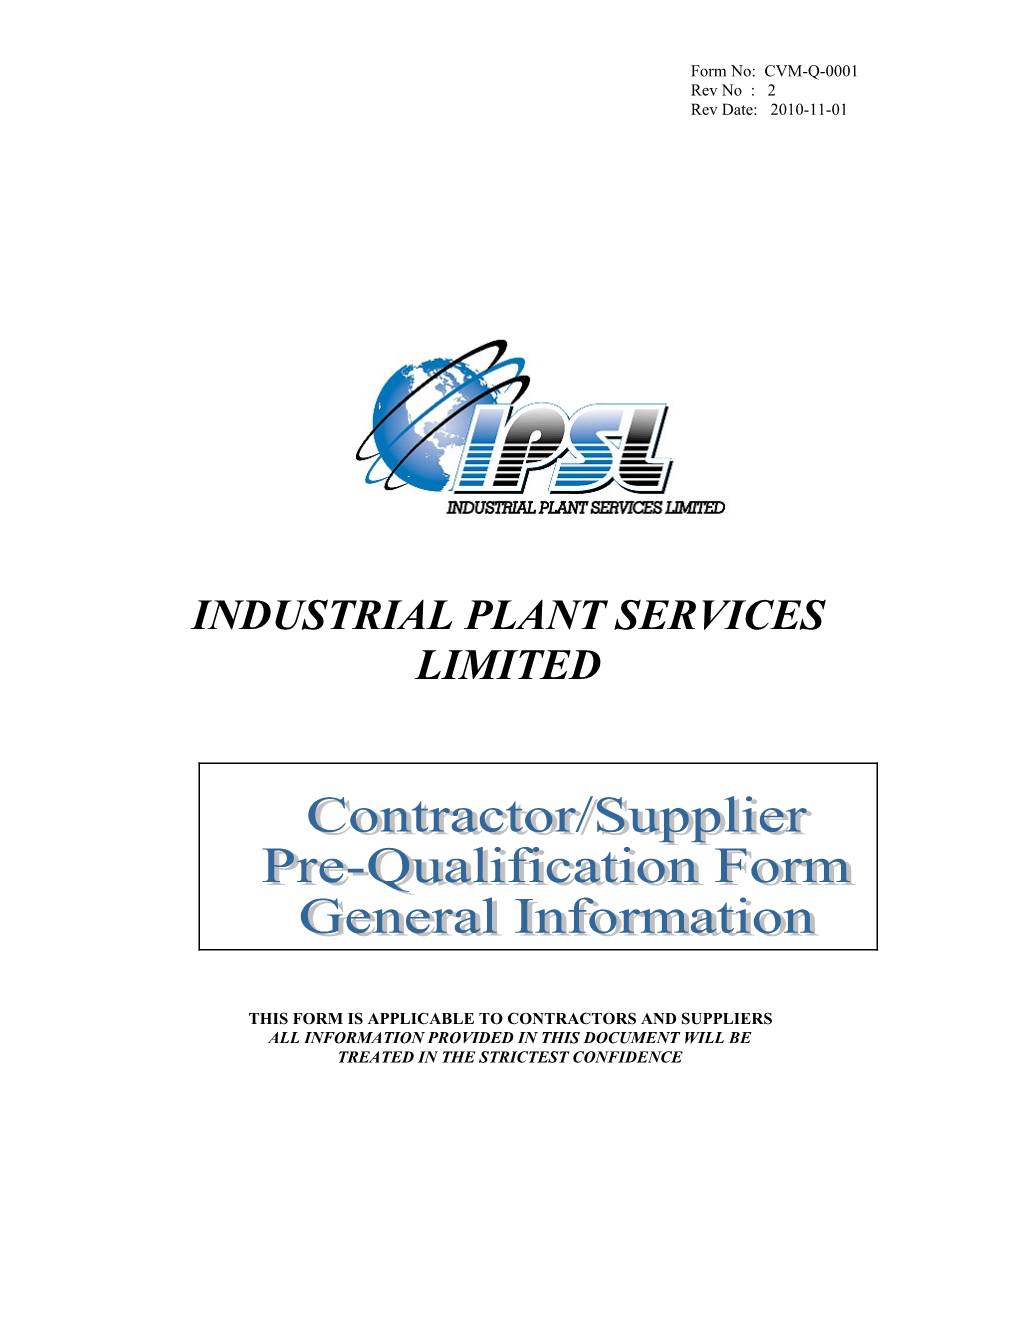 Industrial Plant Services Limited